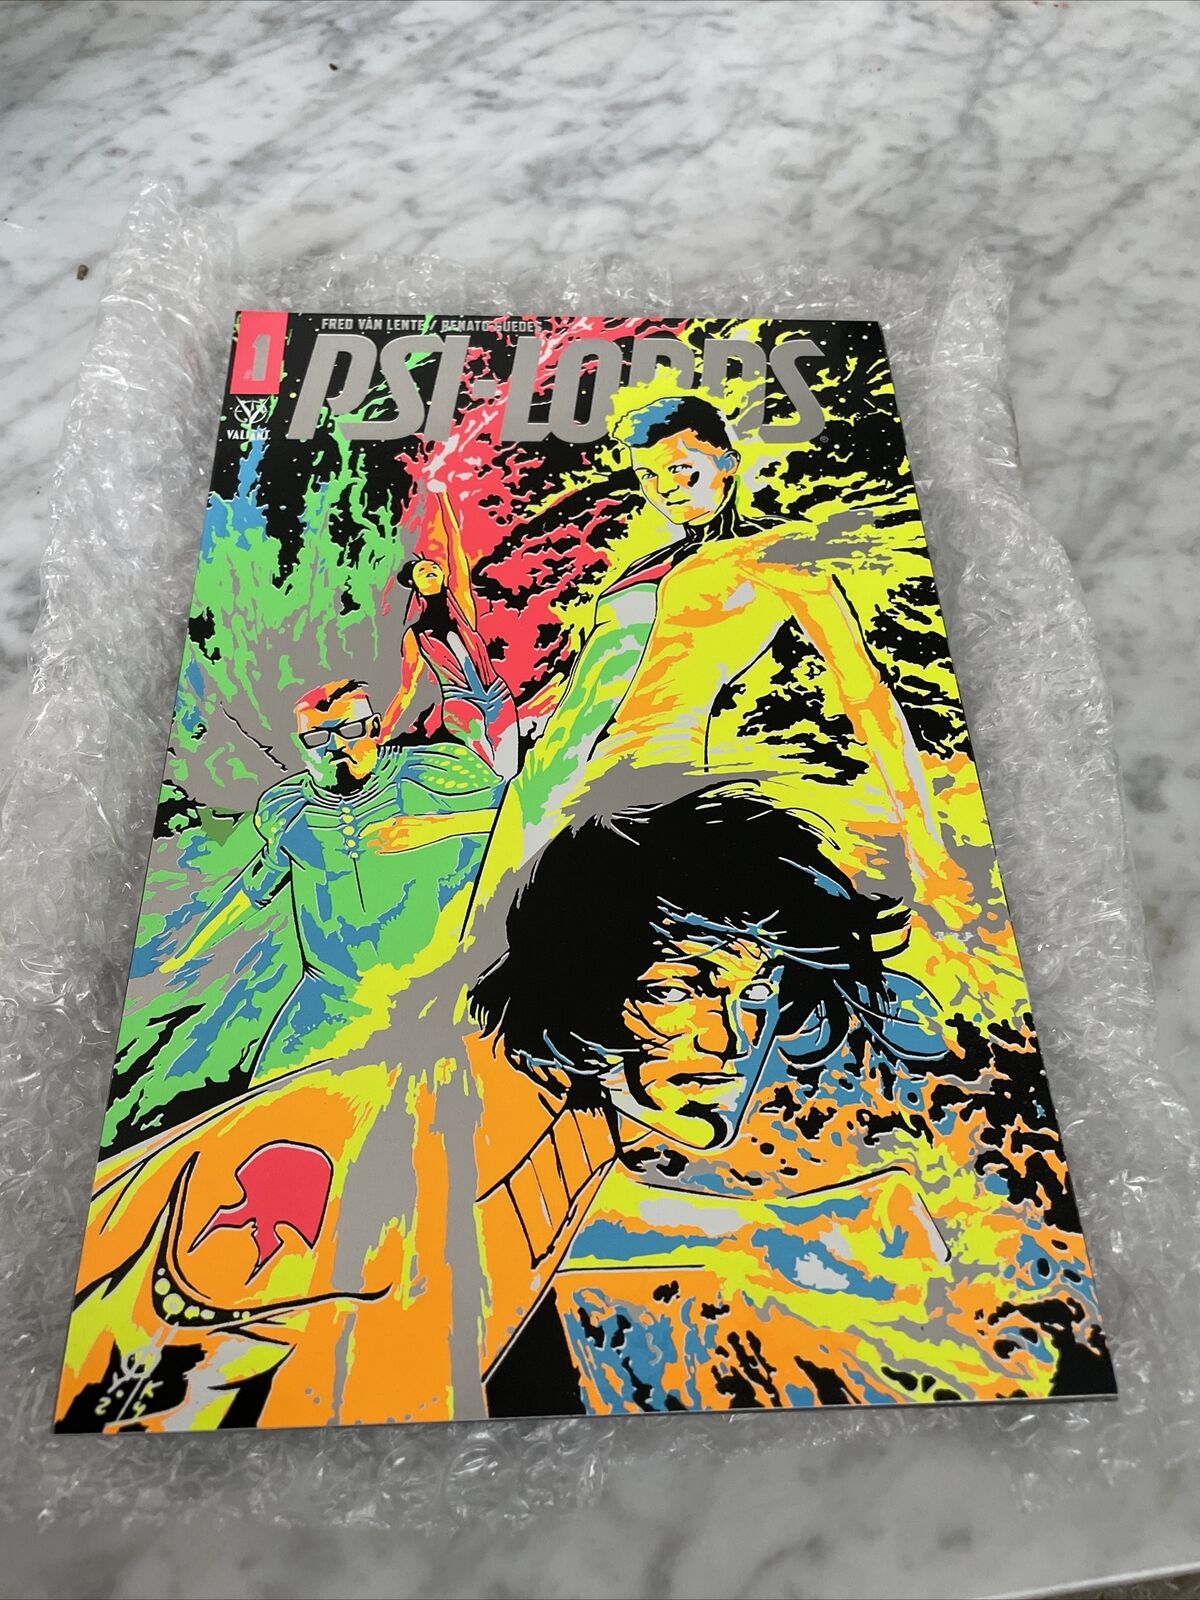 Psi-Lords (series 2) #1 (Variant Cosmic Metal Cover - Marco Rudy) 1:250 